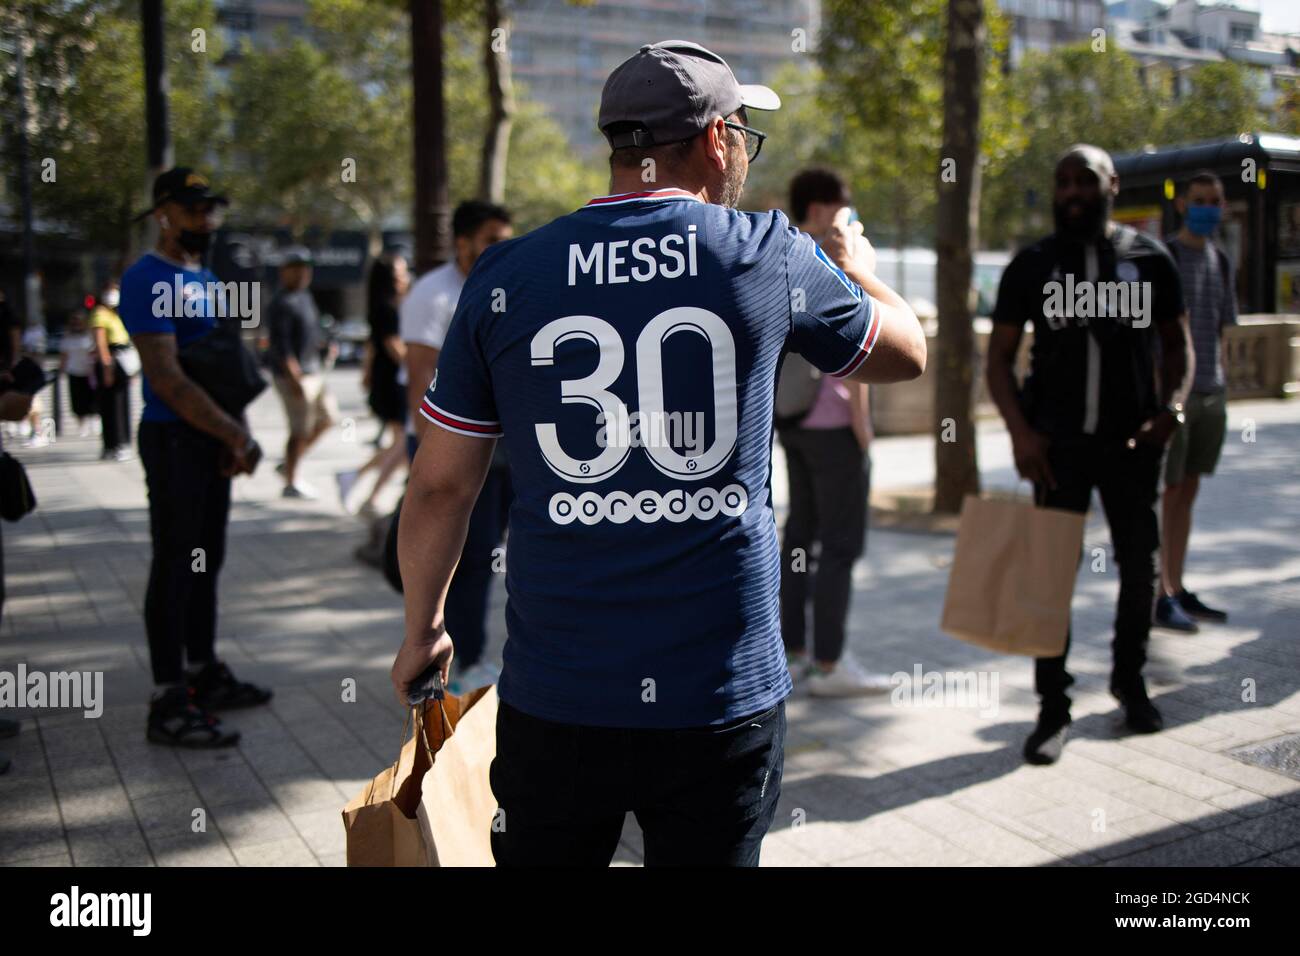 Paris, France. 11th Aug, 2021. A supporter wears a jersey of PSG's Argentinian football player Lionel Messi, that he has just bought at the Paris-Saint-Germain (PSG) football club store on the Champs Elysees avenue in Paris on August 11, 2021. Messi signed on August 10, 2021 a two-year deal with PSG with the option of an additional year. The 34-year-old will wear the number 30 in Paris, the number he had when he began his professional career at Barca. Photo by Raphael Lafargue/ABACAPRESS.COM Credit: Abaca Press/Alamy Live News Stock Photo